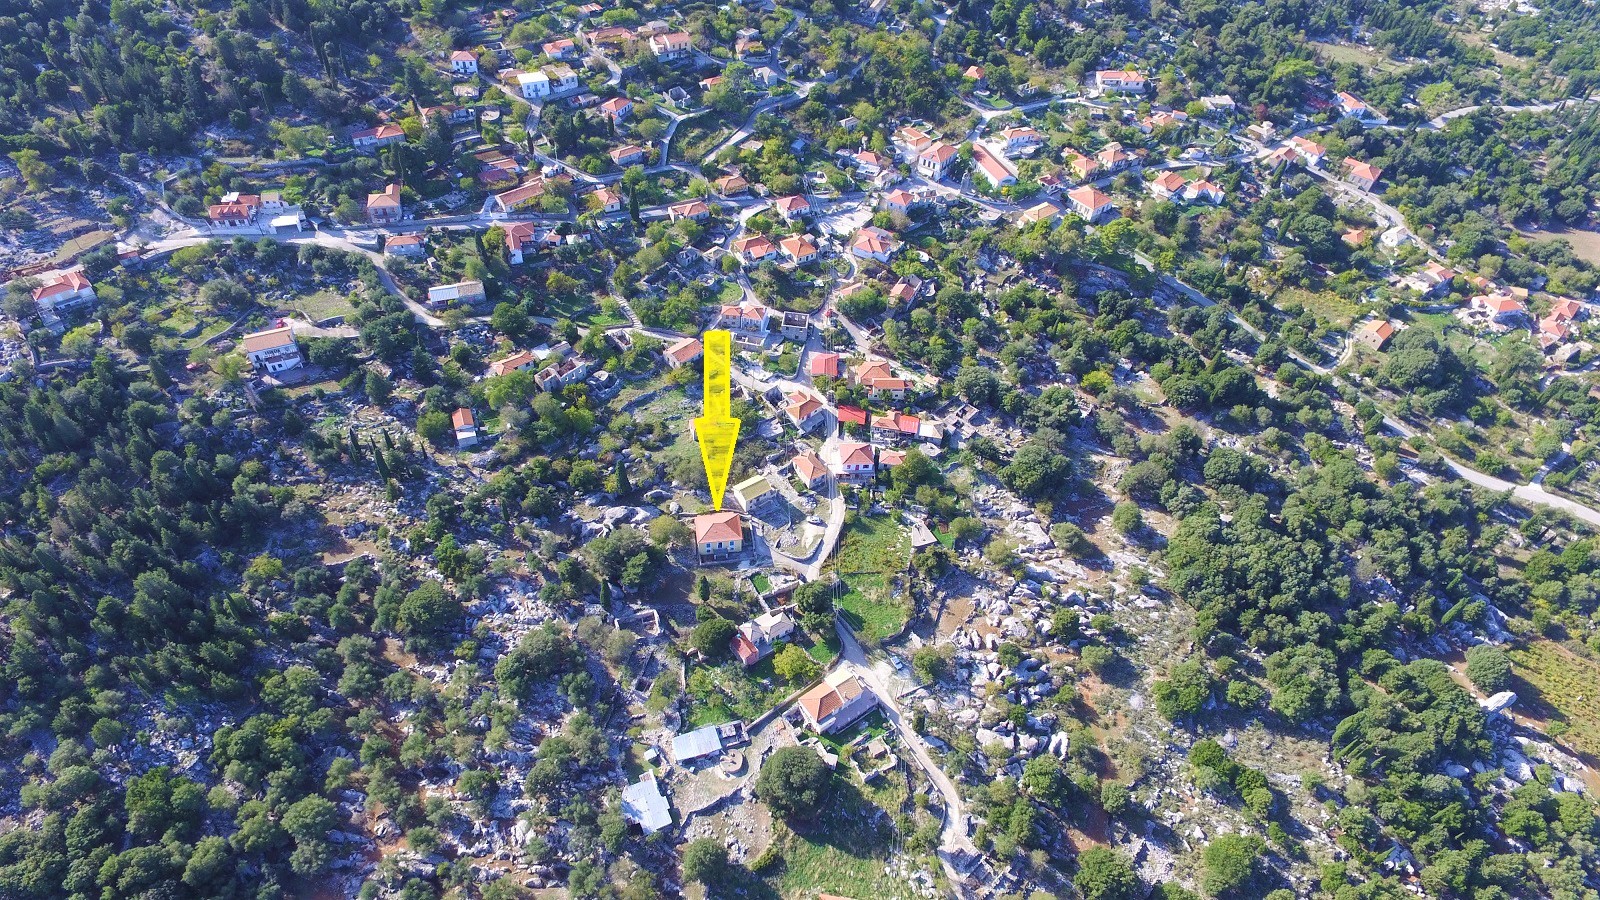 Aerial views of house for sale on Ithaca Greece, Anoghi